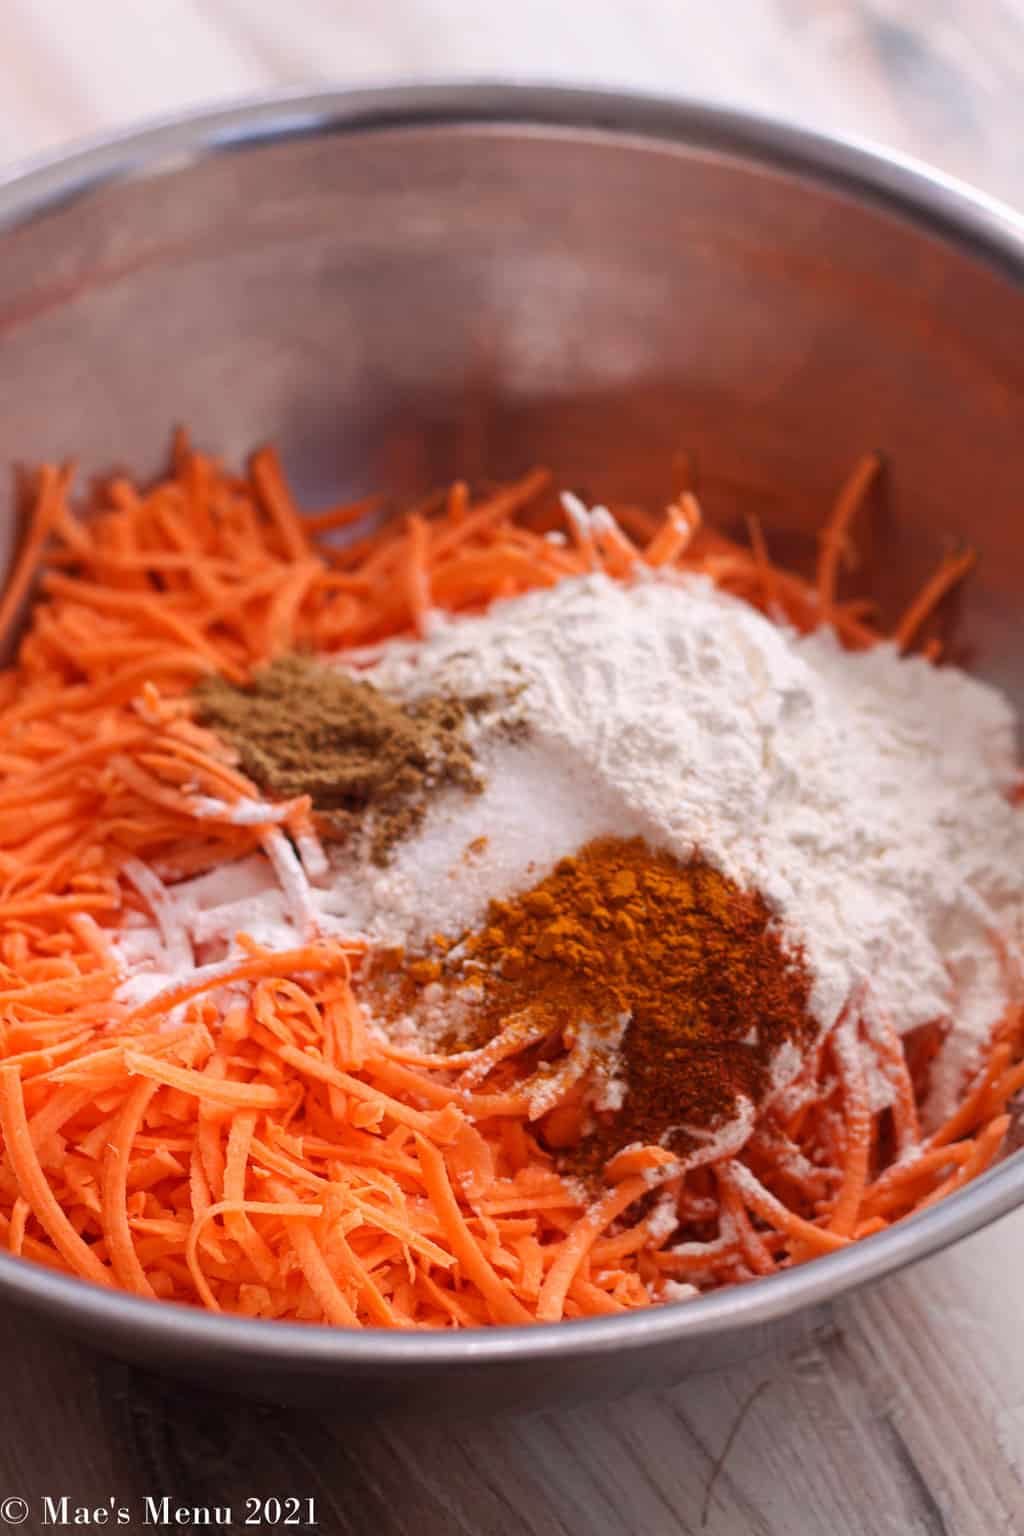 A large mixing bowl of shredded sweet potatoes, spices, and flour